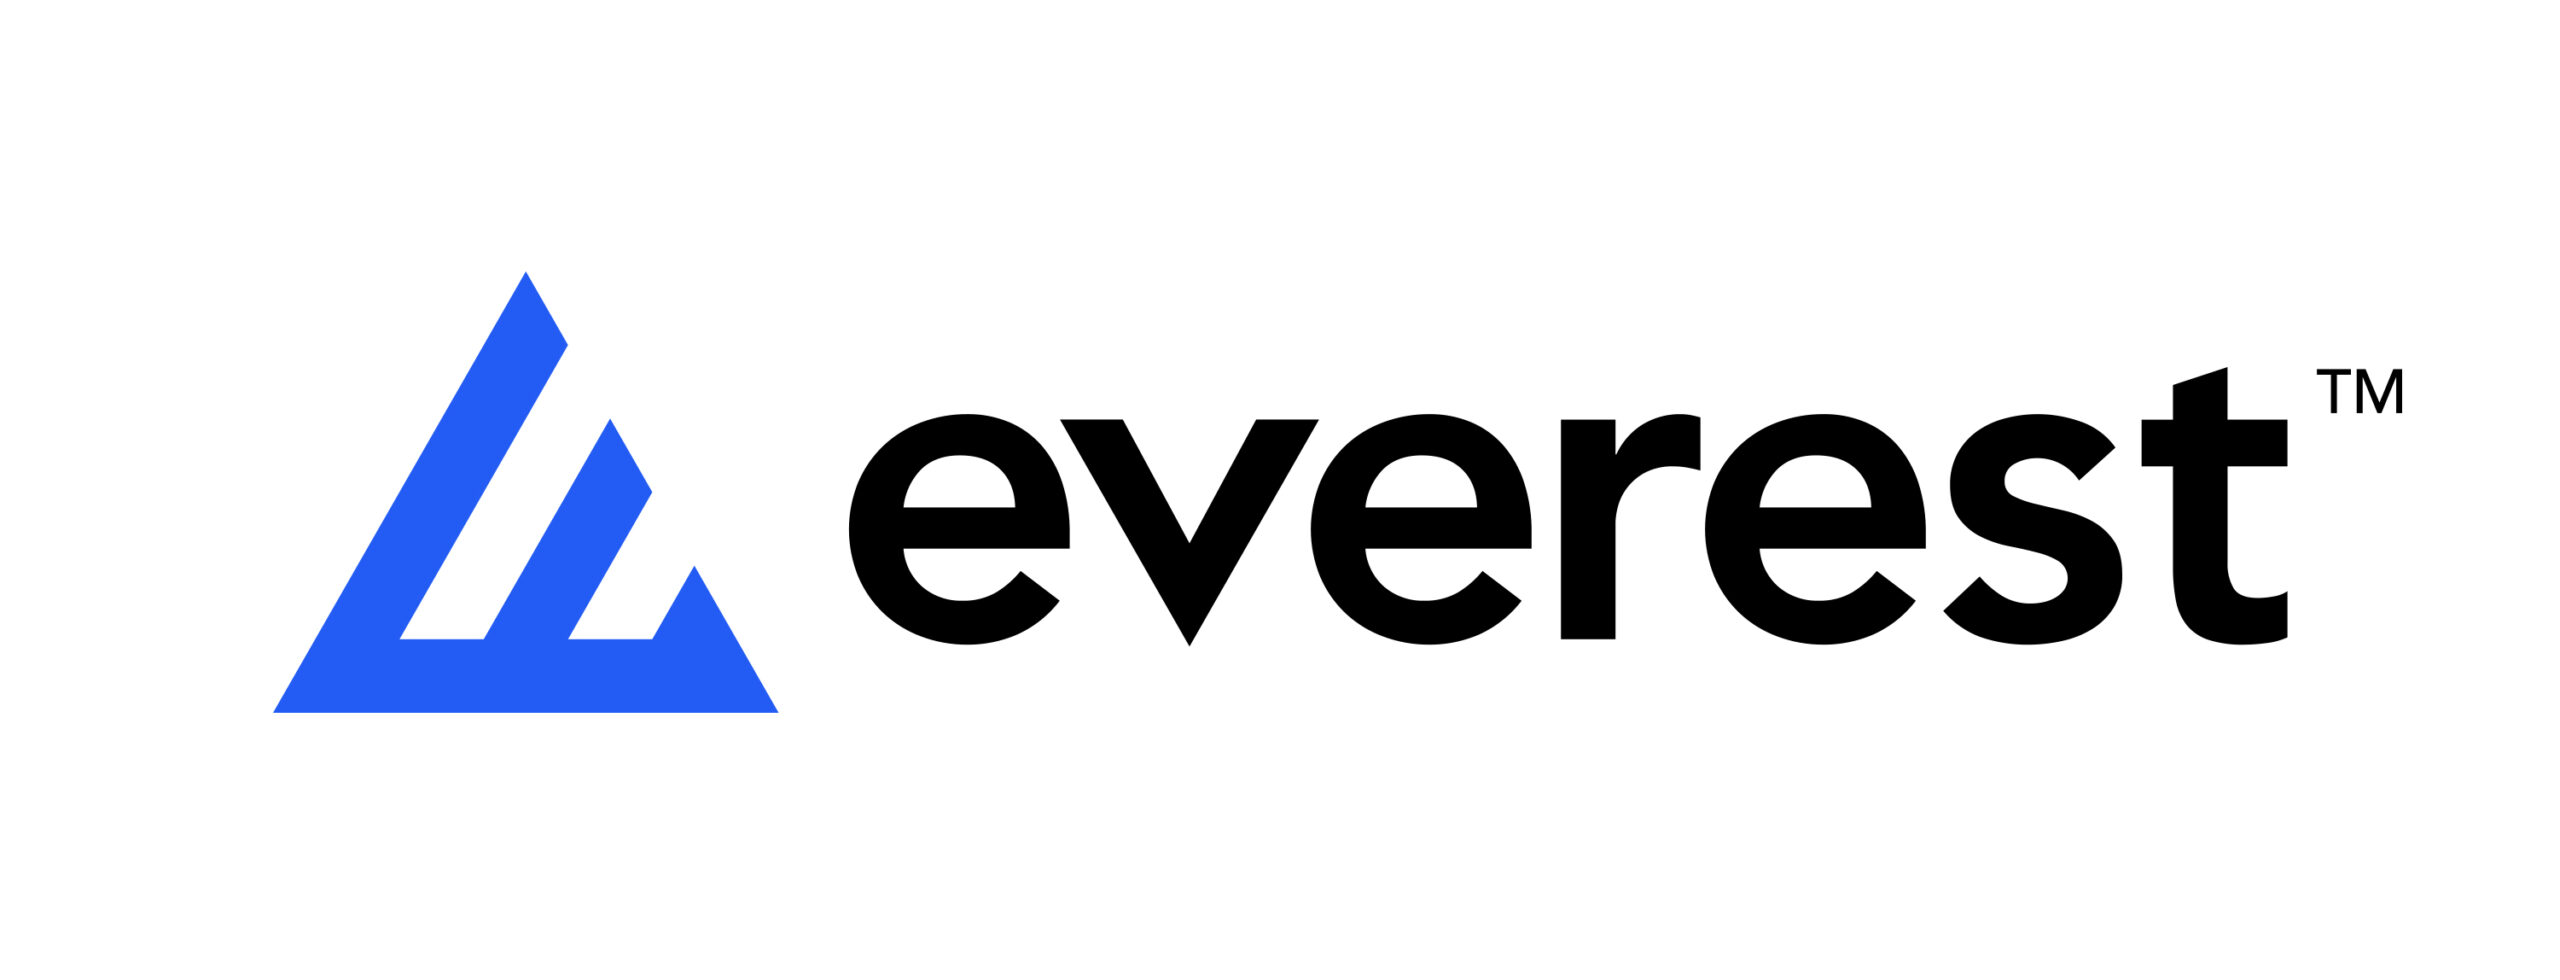 Everest Re Group Rebrands to Everest Group